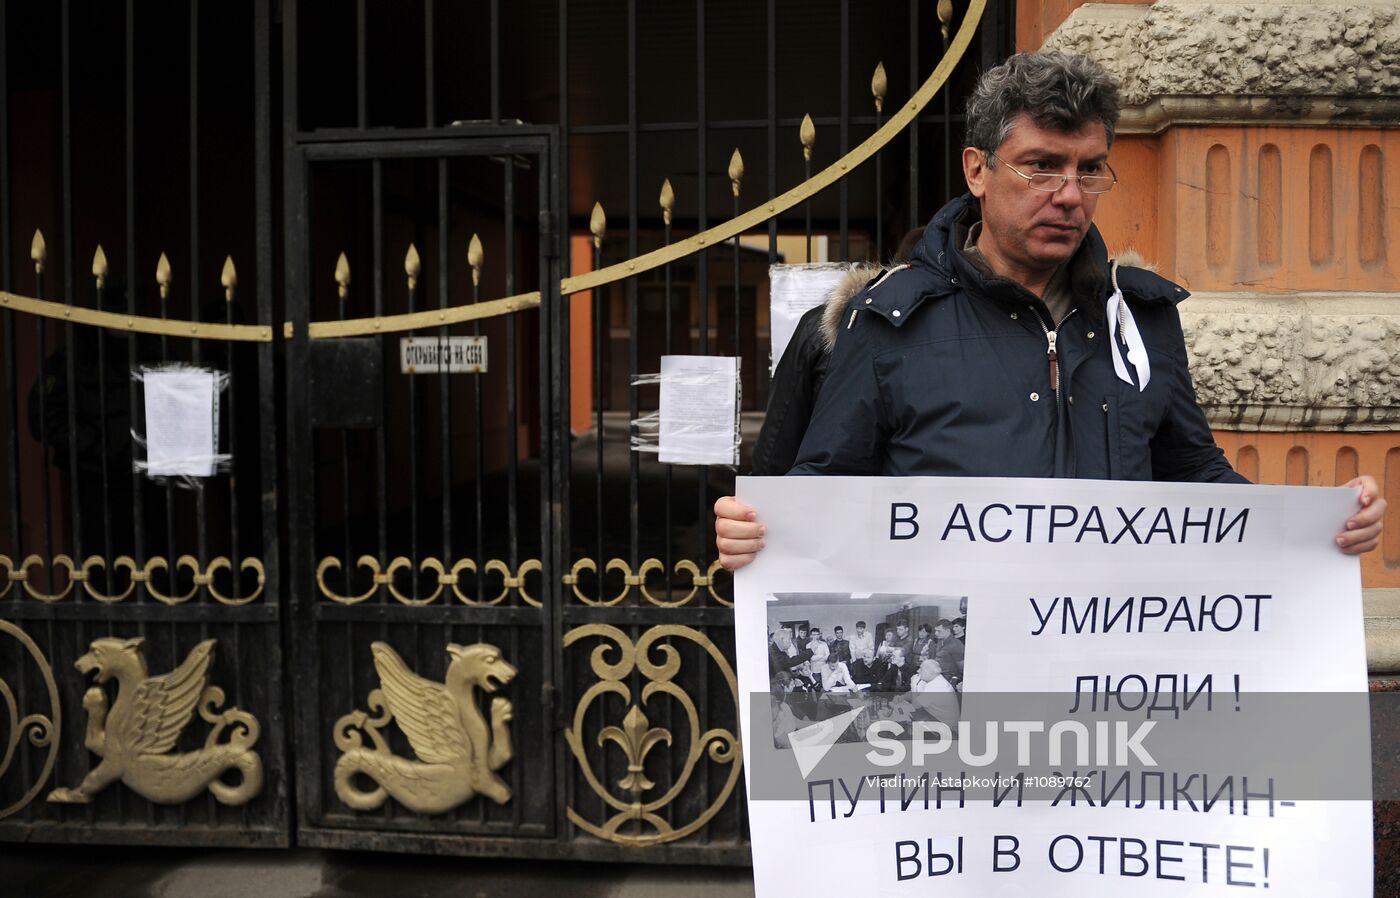 Picket outside Astrakhan regional office in Moscow